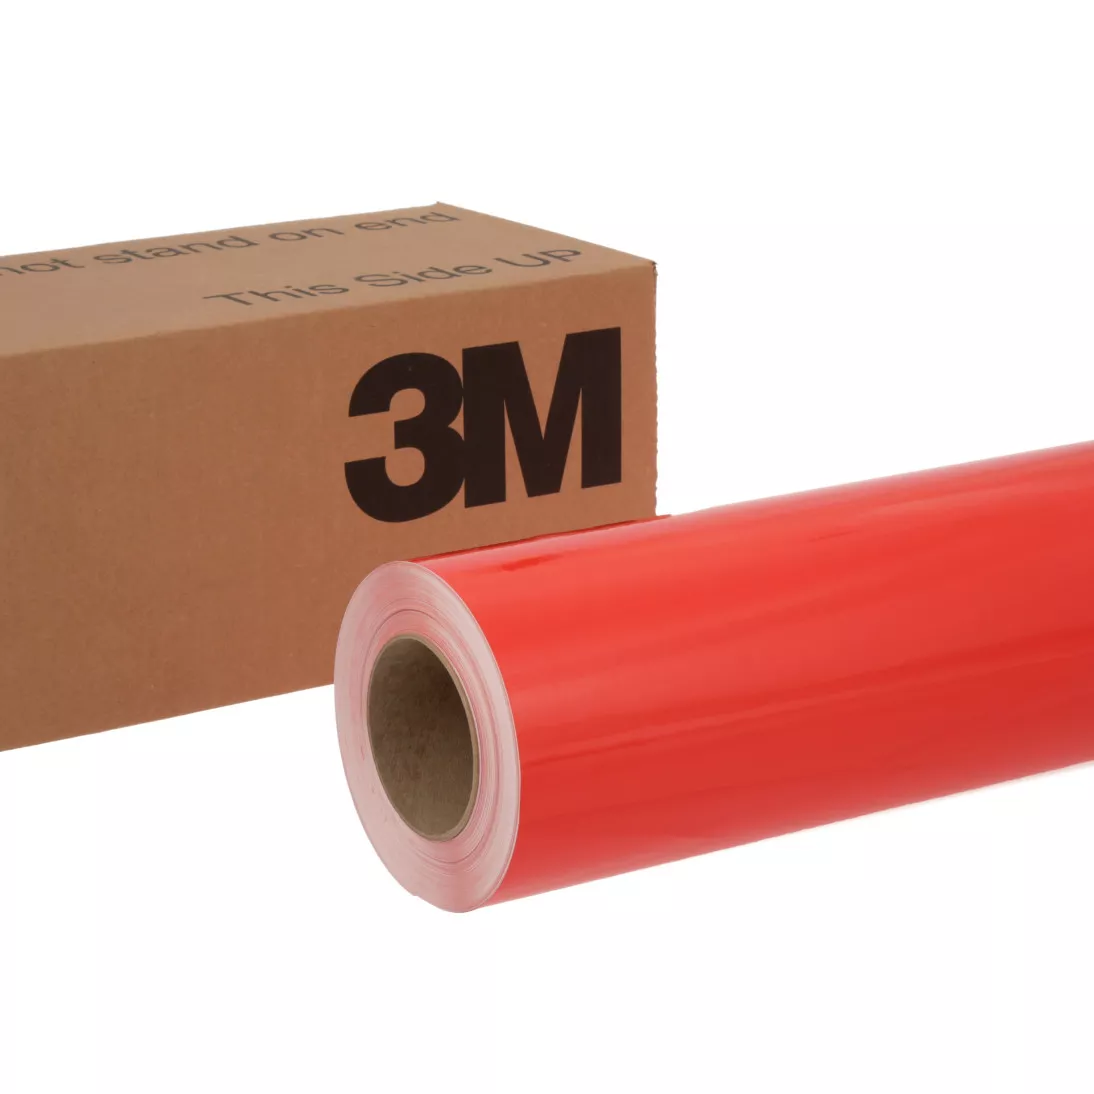 3M™ Scotchcal™ ElectroCut™ Graphic Film 7125-293, Atomic Red, 48 in x 50
yd